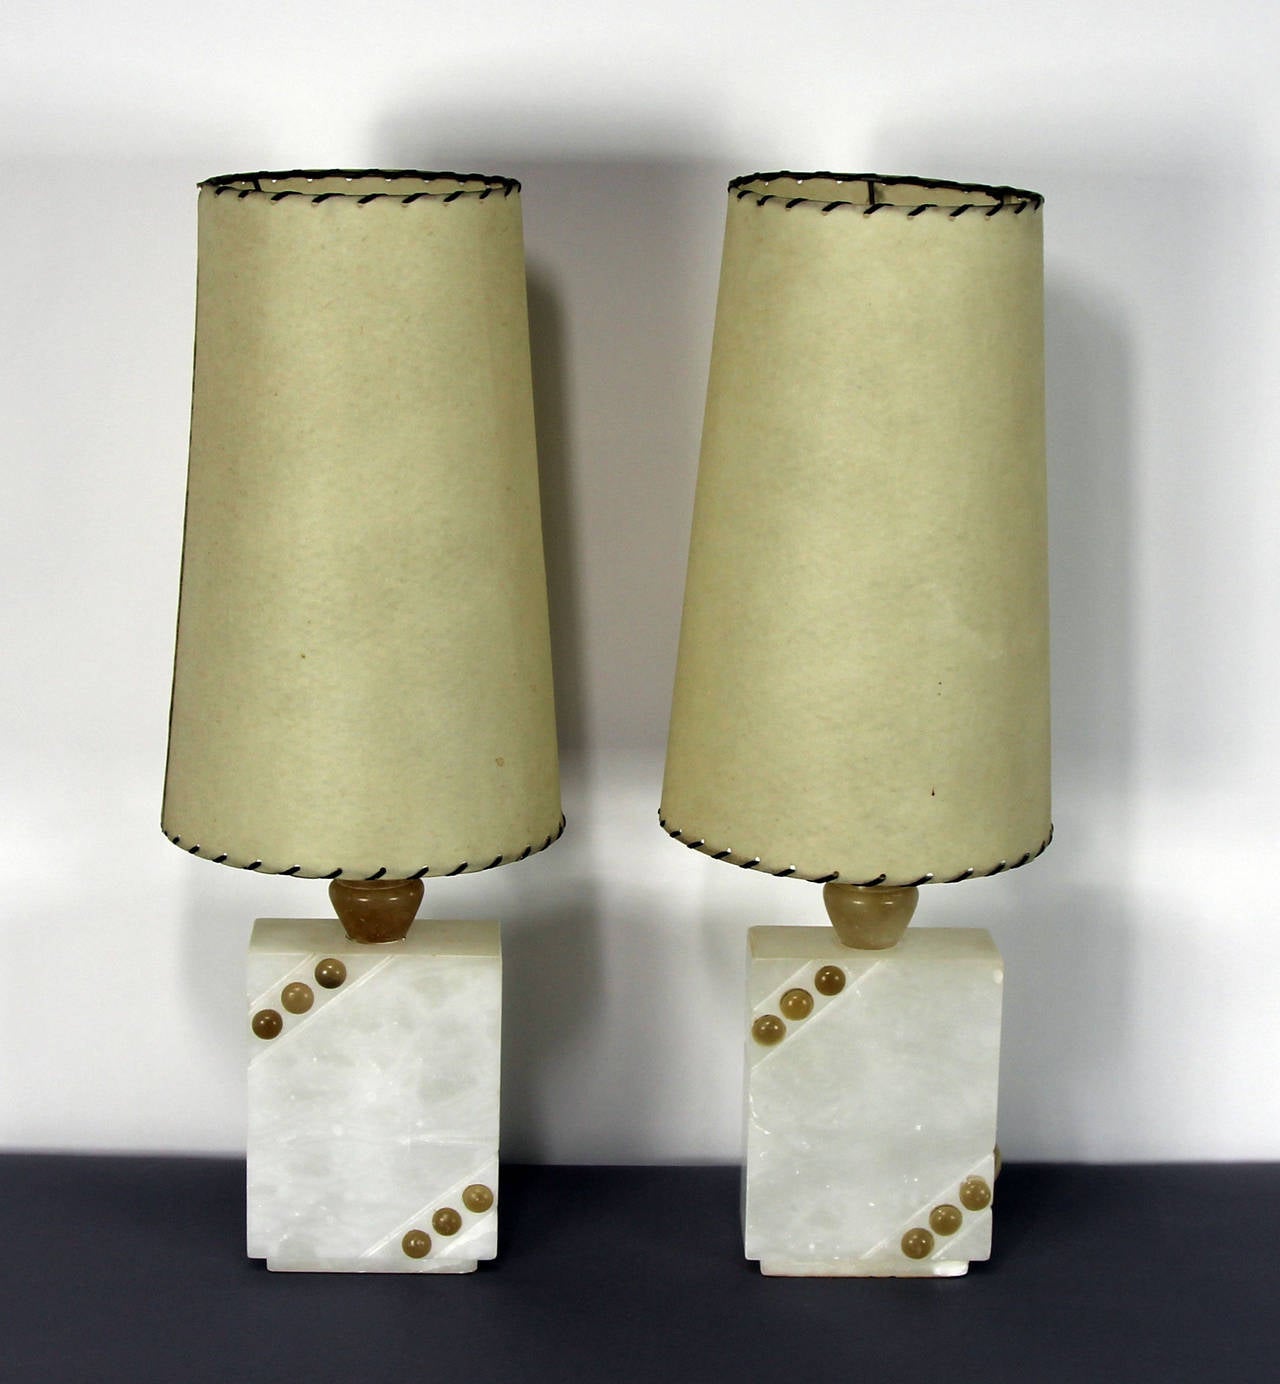 Pair of 1950s Italian Alabaster Modernist Table Lamps In Excellent Condition For Sale In Bridport, CT